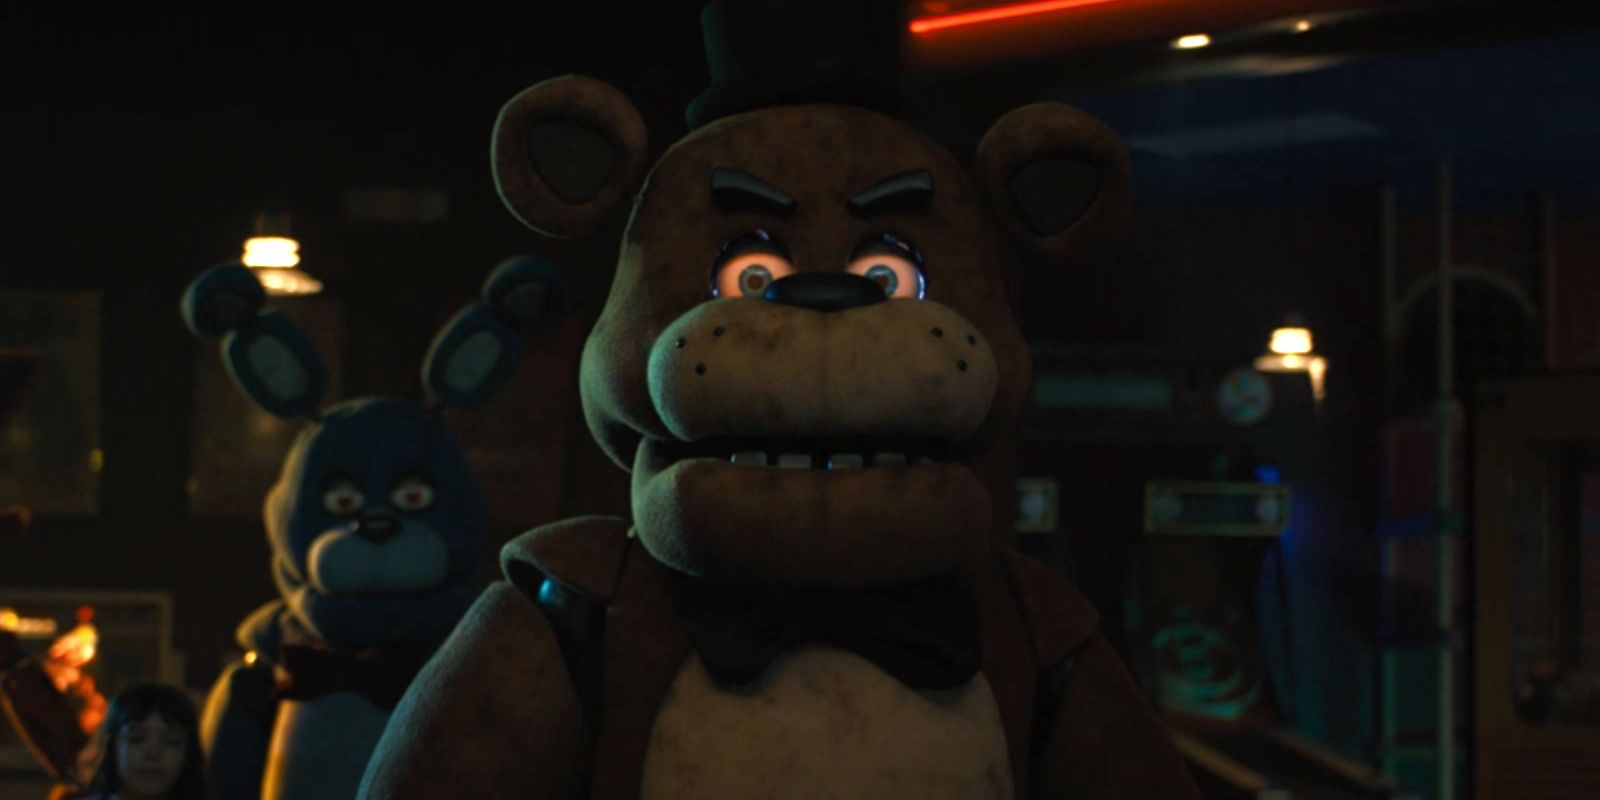 Freddy glares with glowing red eyes while Bonnie and Abby stand behind him.